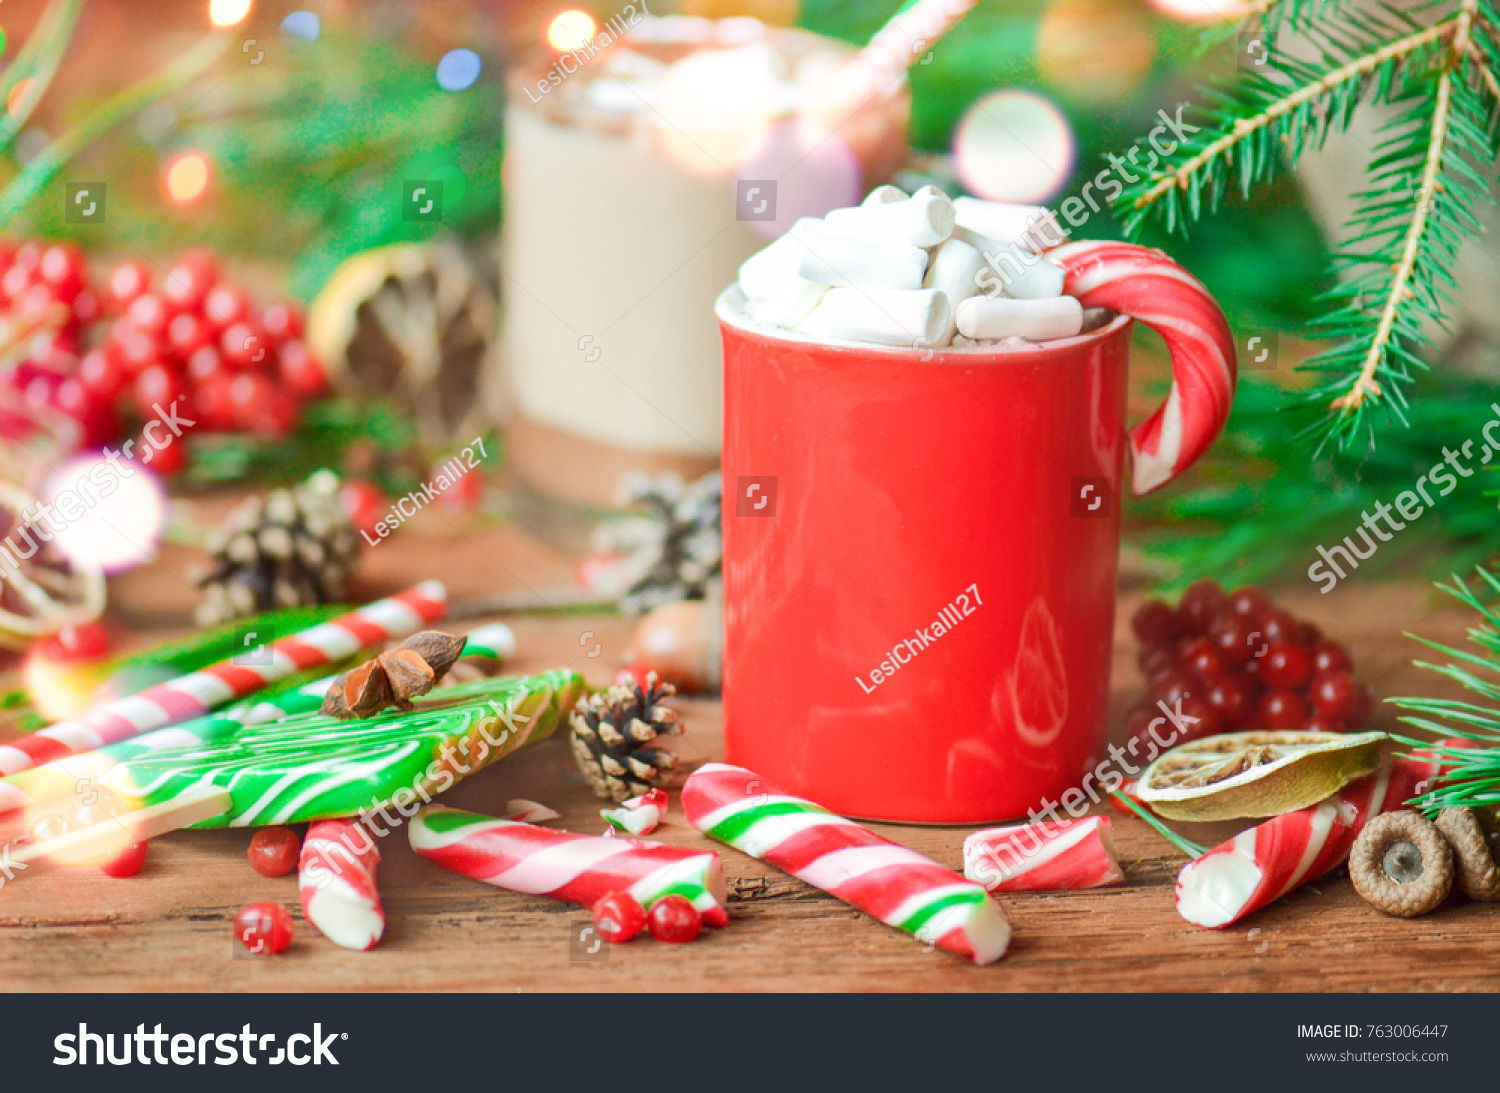 Christmas Hot Chocolate Candy Hot Cocoa Stock Photo 763006447 ...